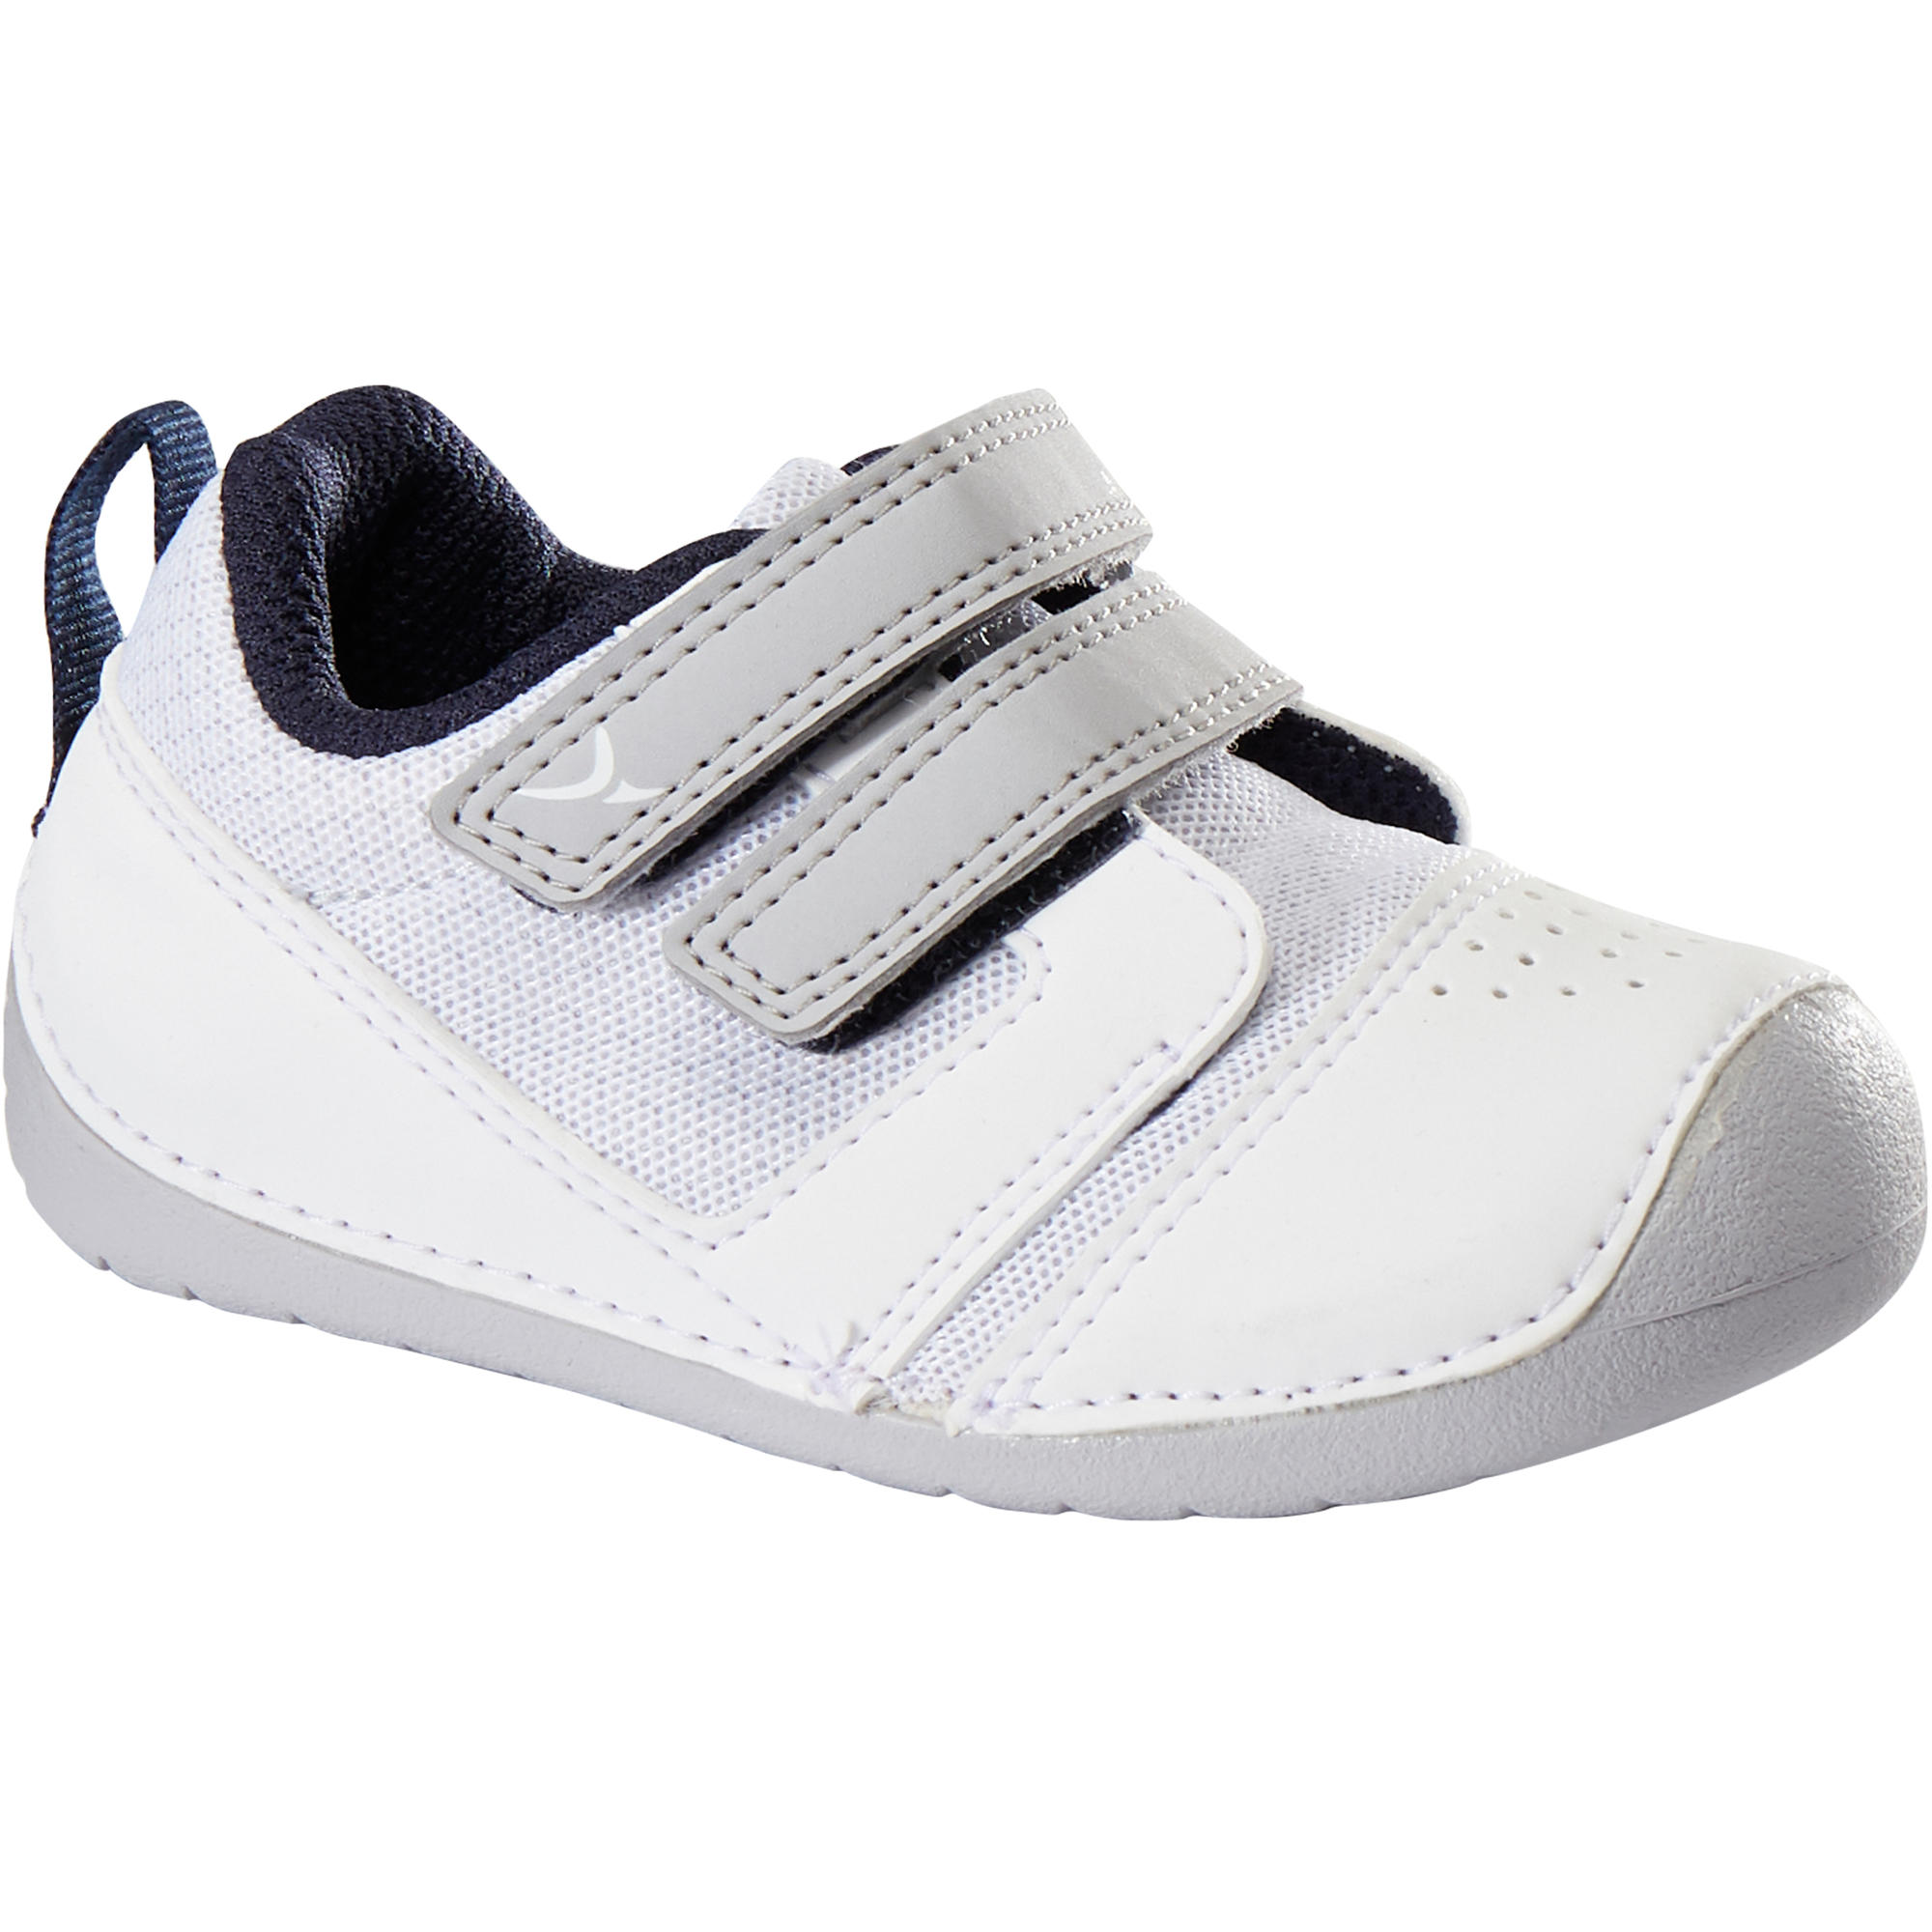 Learn Breathe Gym Shoes - White/Navy 